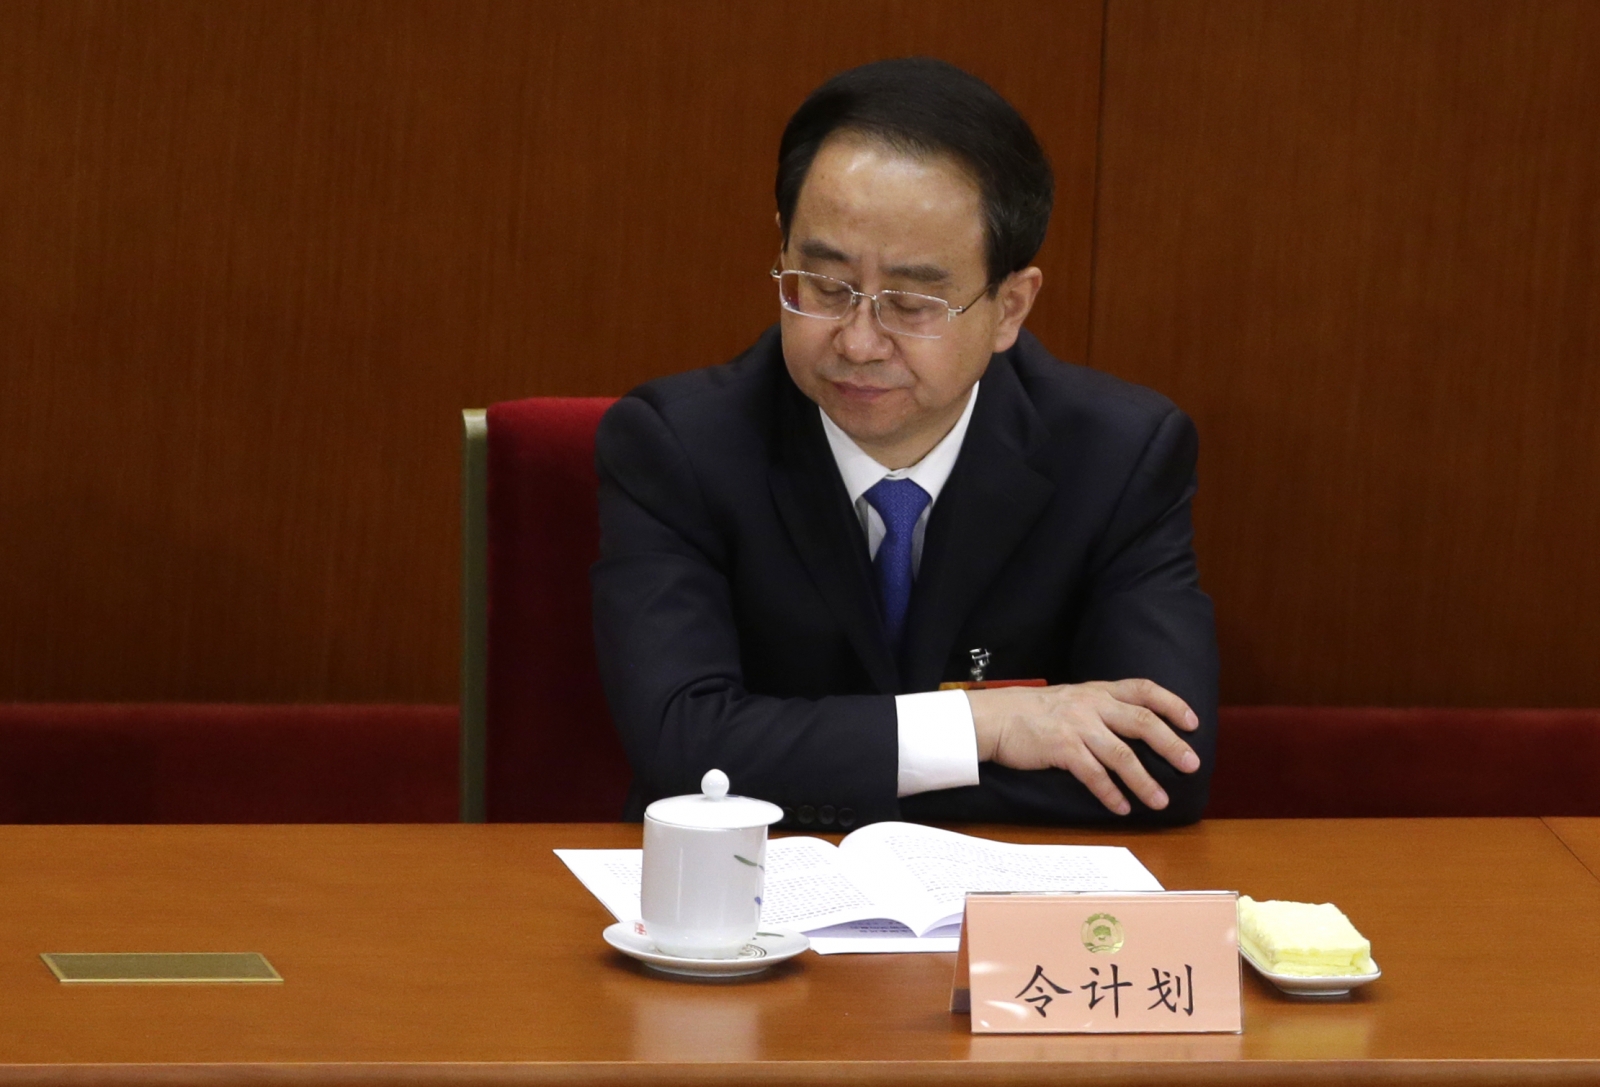 China Former Presidential Aide Faces Charges Of Corruption And Sexual Misconduct